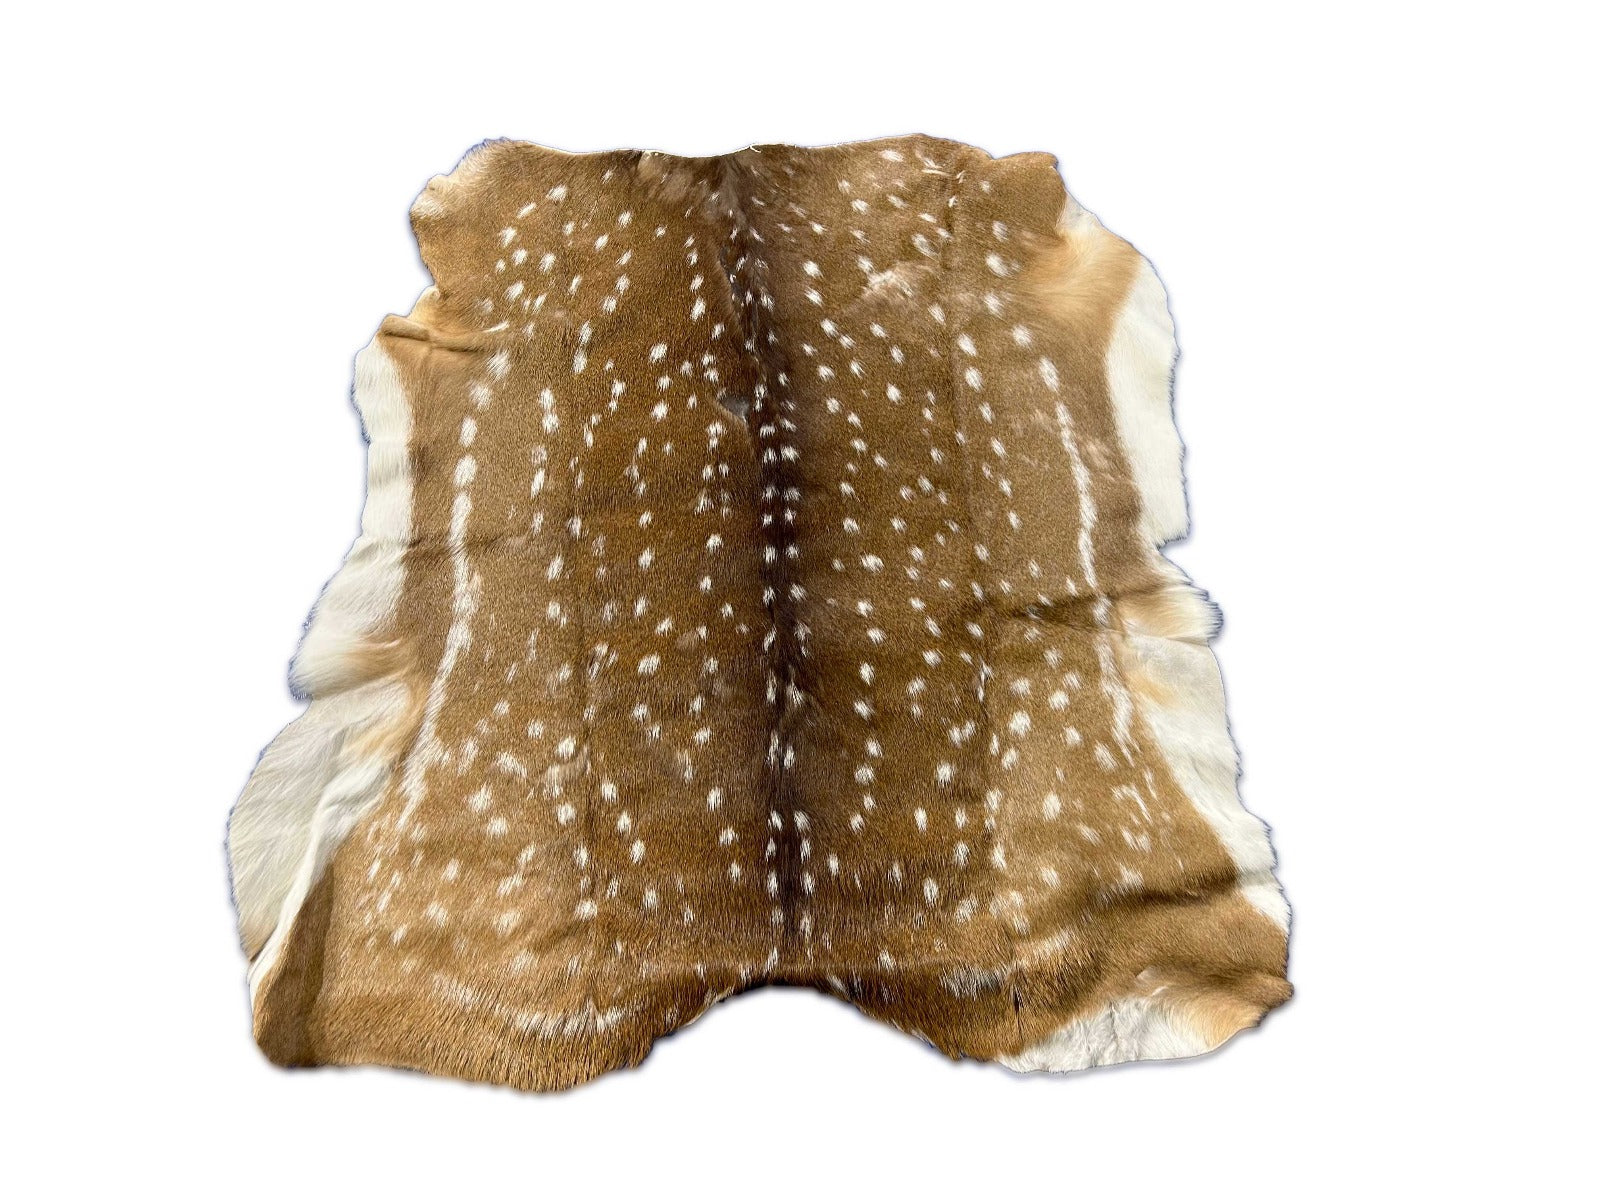 Axis Deer Skin (1 hole/ hard to see imperfections) Size: 41x38" O-379